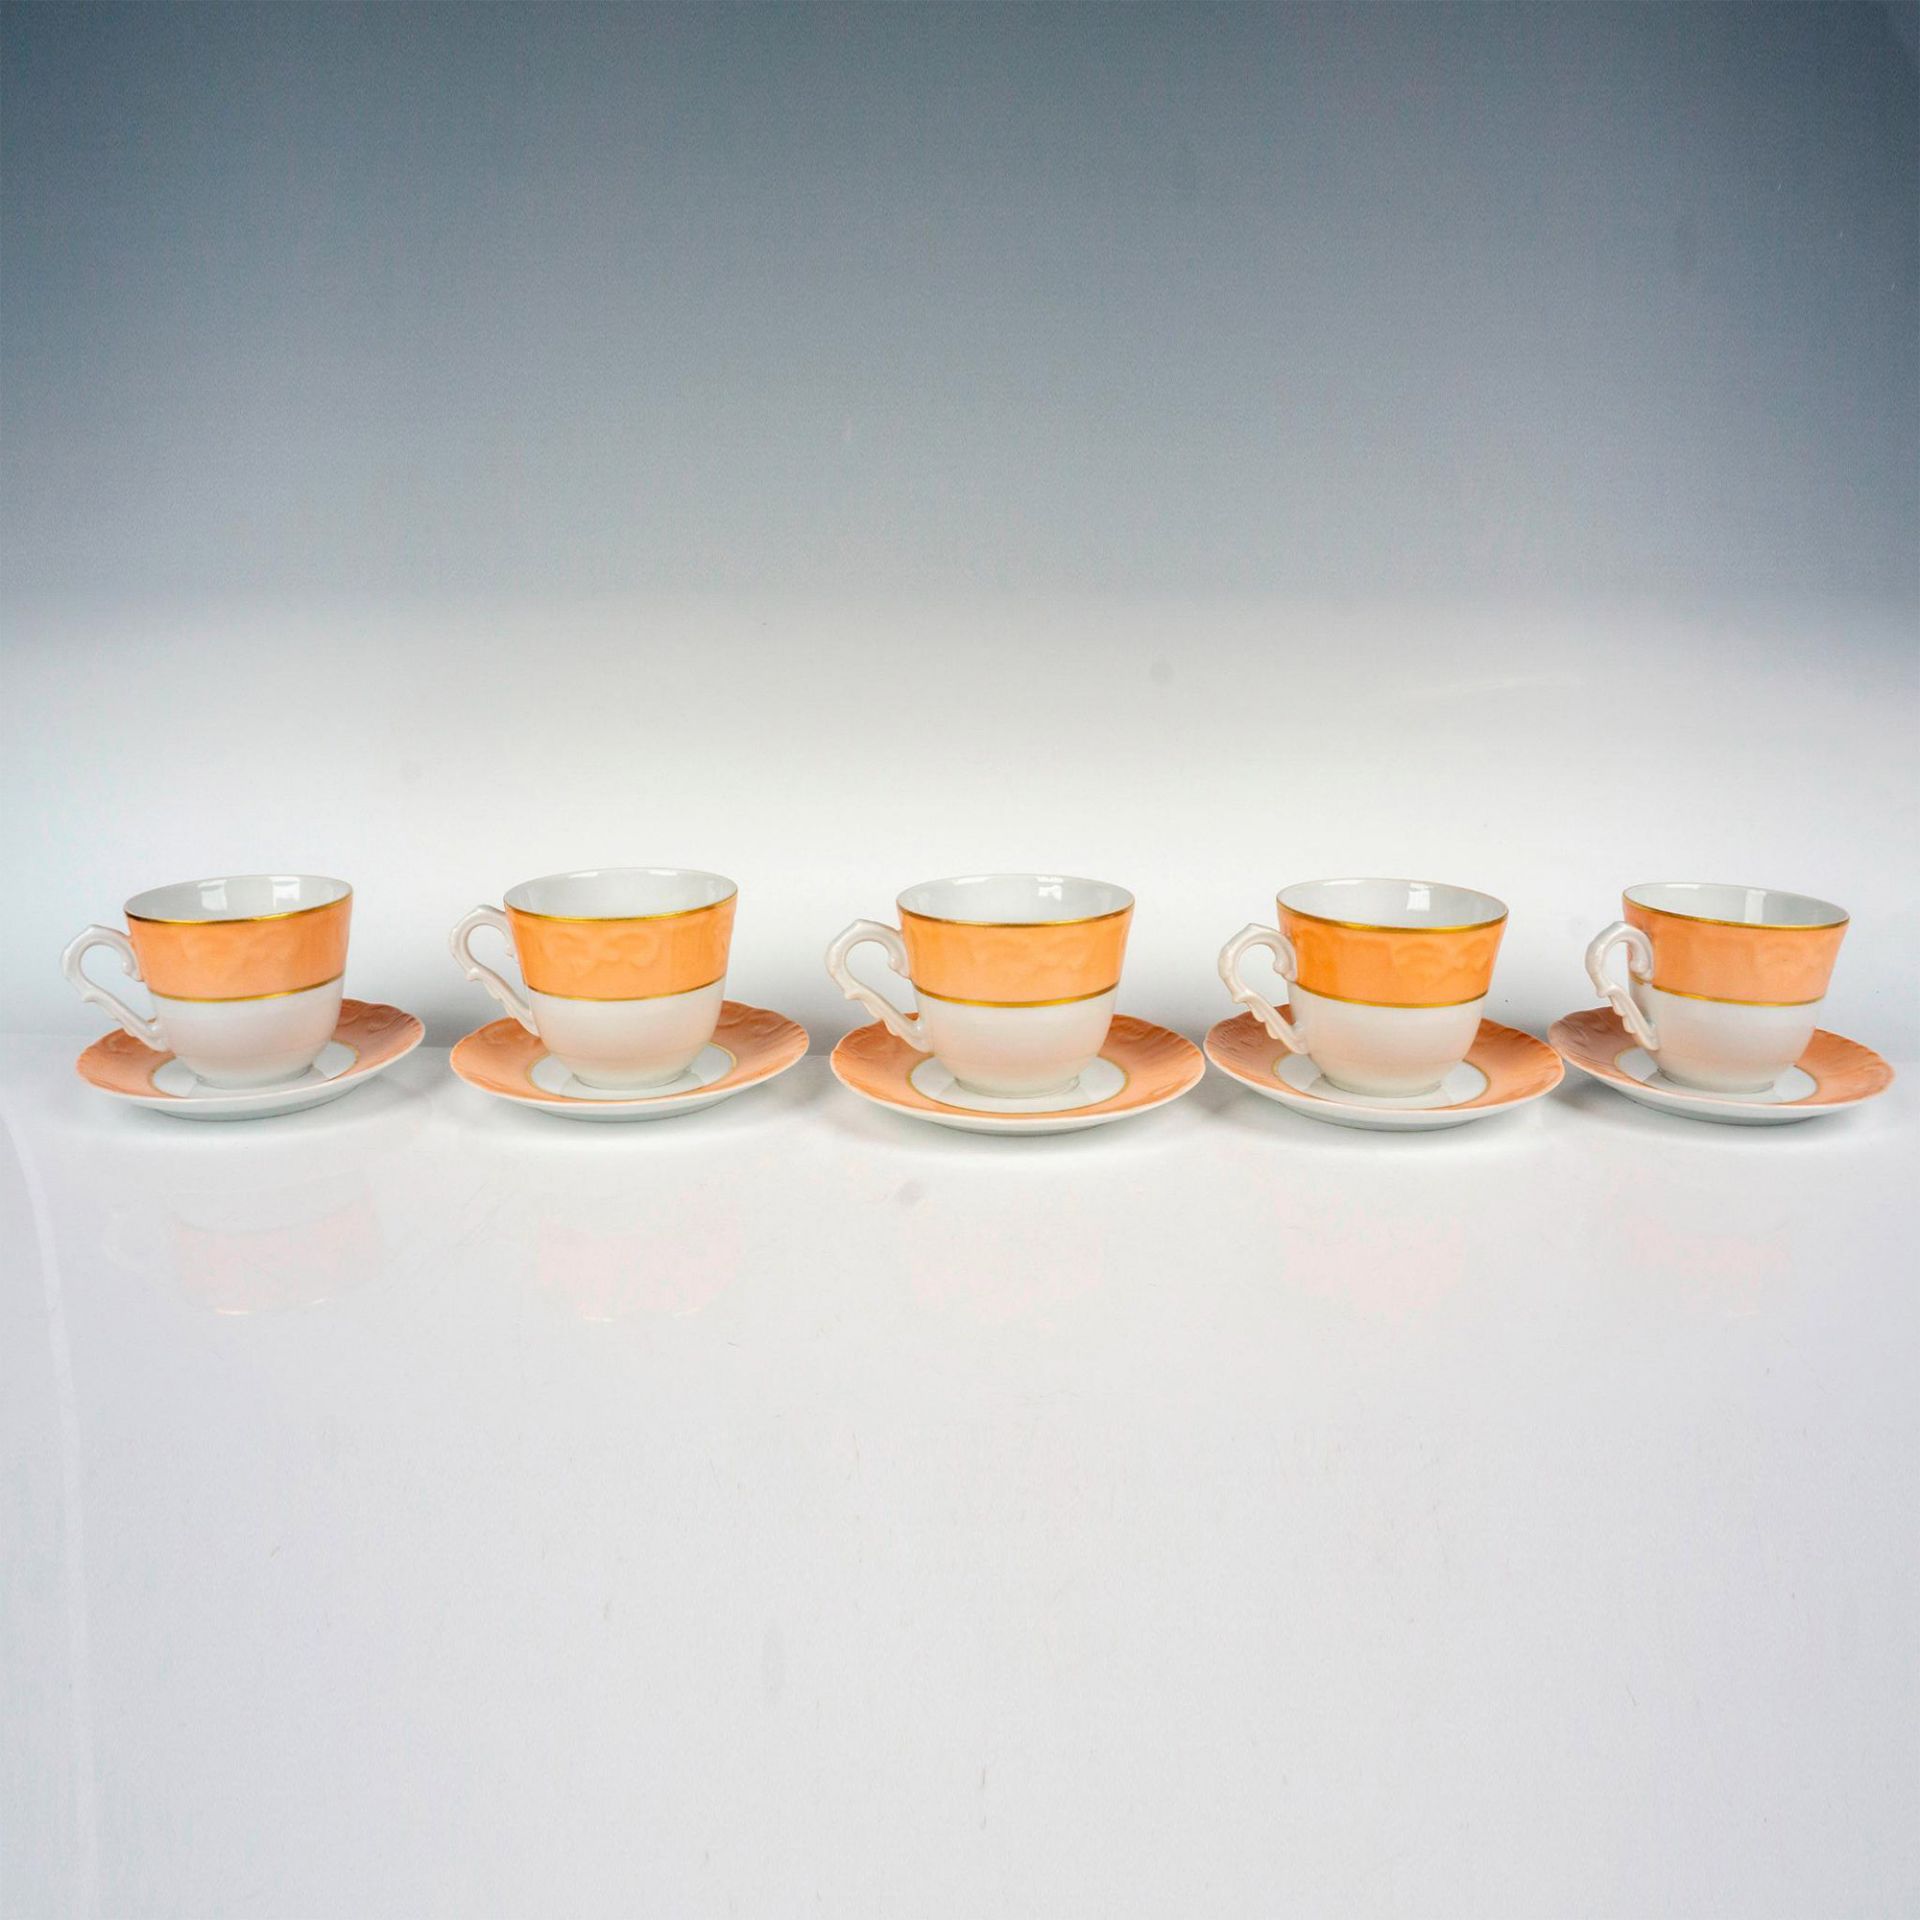 10pc Mottahedeh Coffee Cups and Saucers - Image 2 of 4